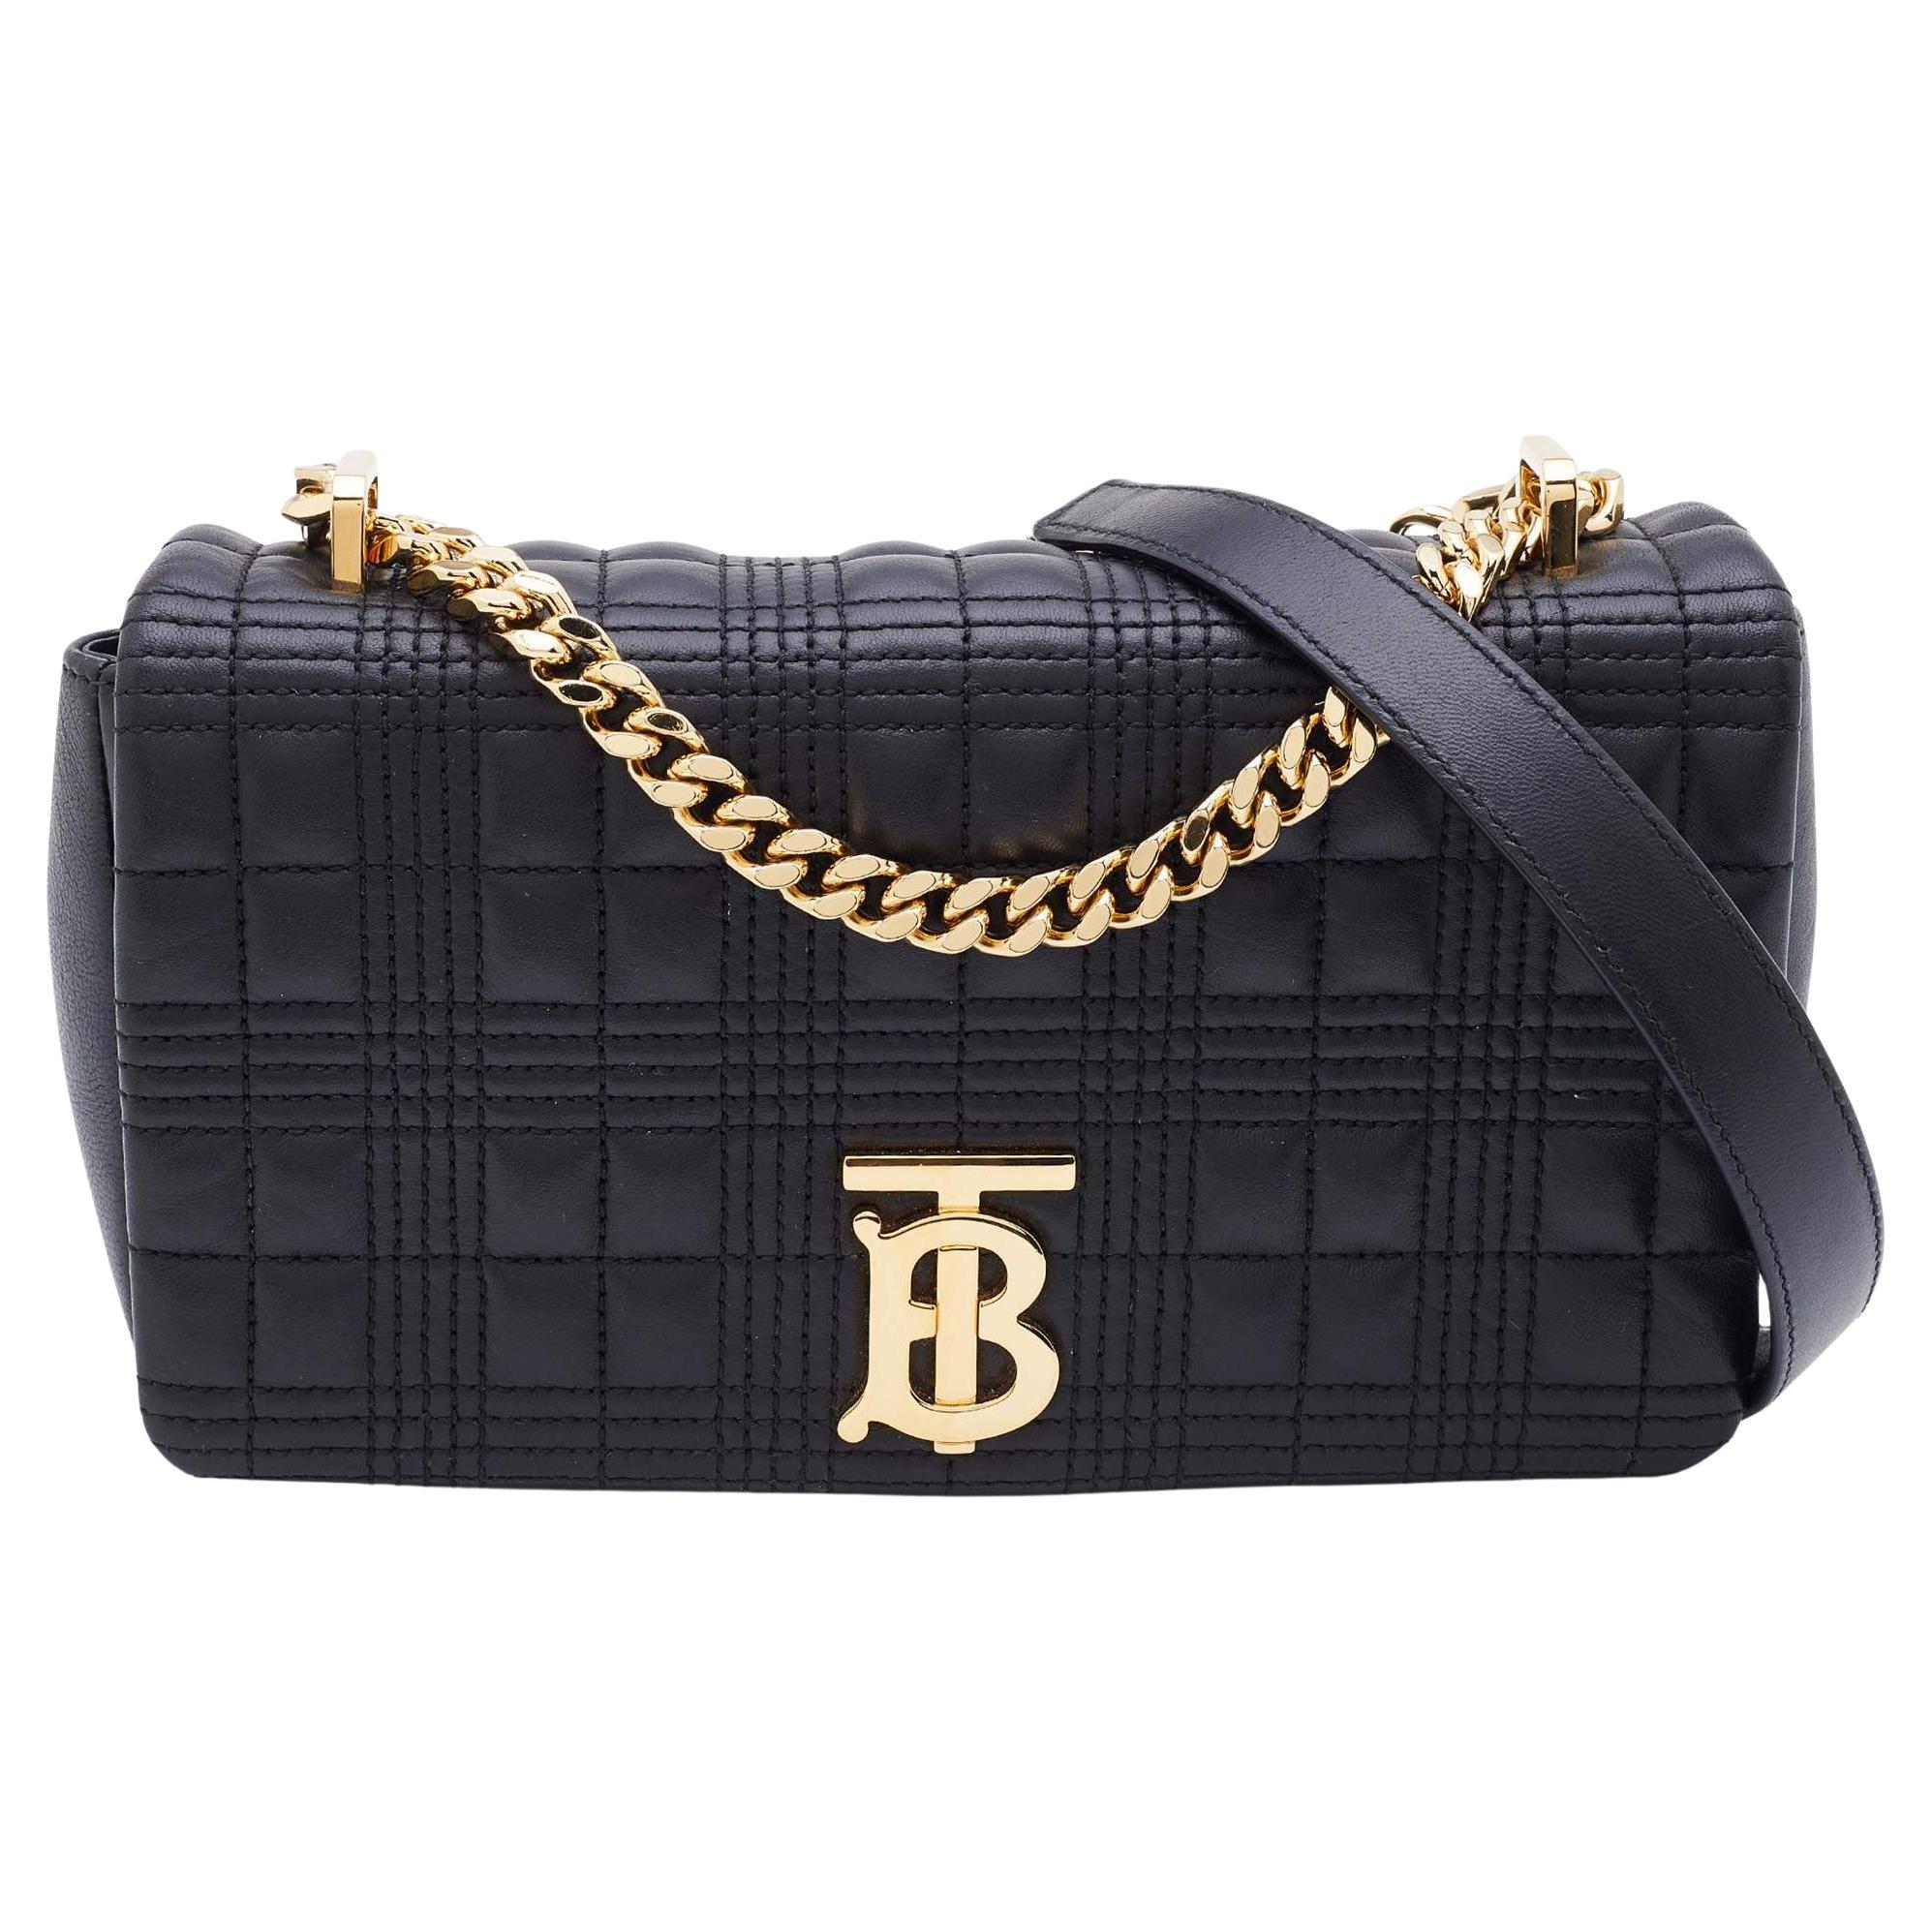 Burberry Quilted Leather Small Lola Bucket Bag Black/Gold-tone